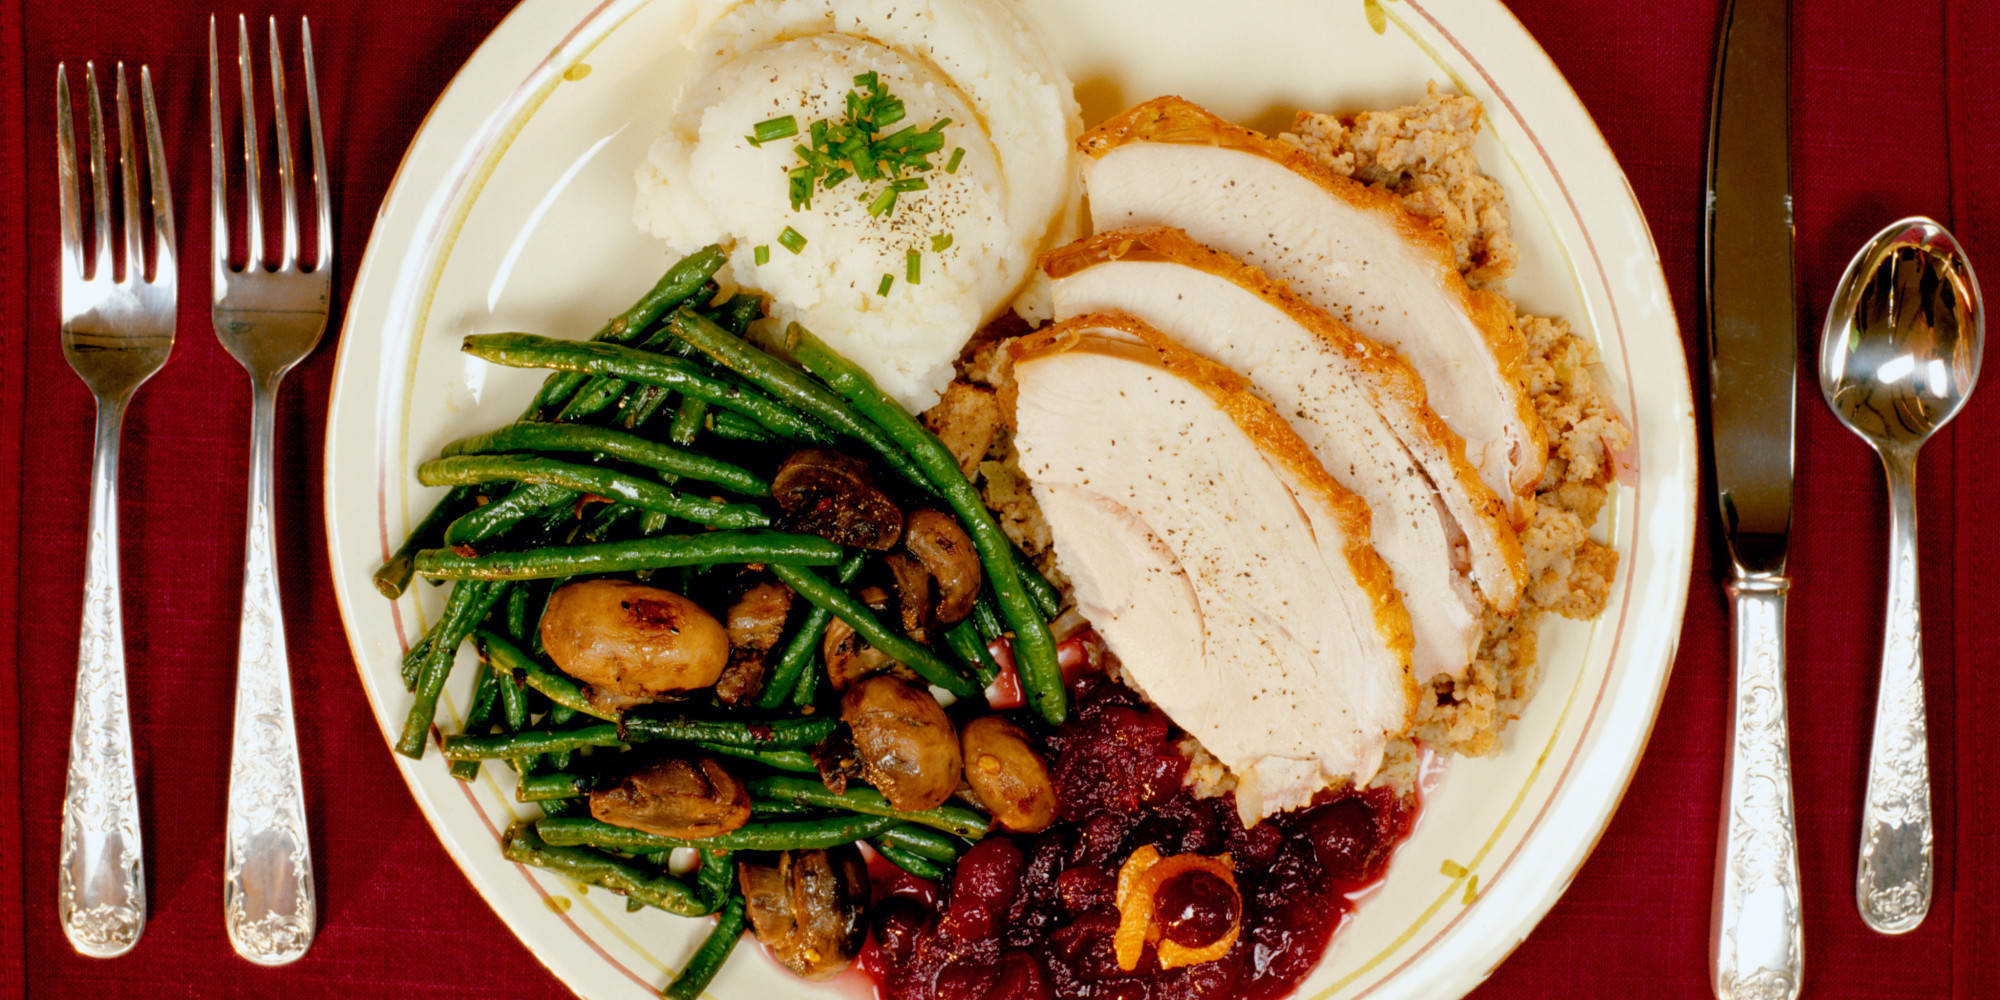 Best Side Dishes For Thanksgiving
 Which Thanksgiving Side Dish Are You